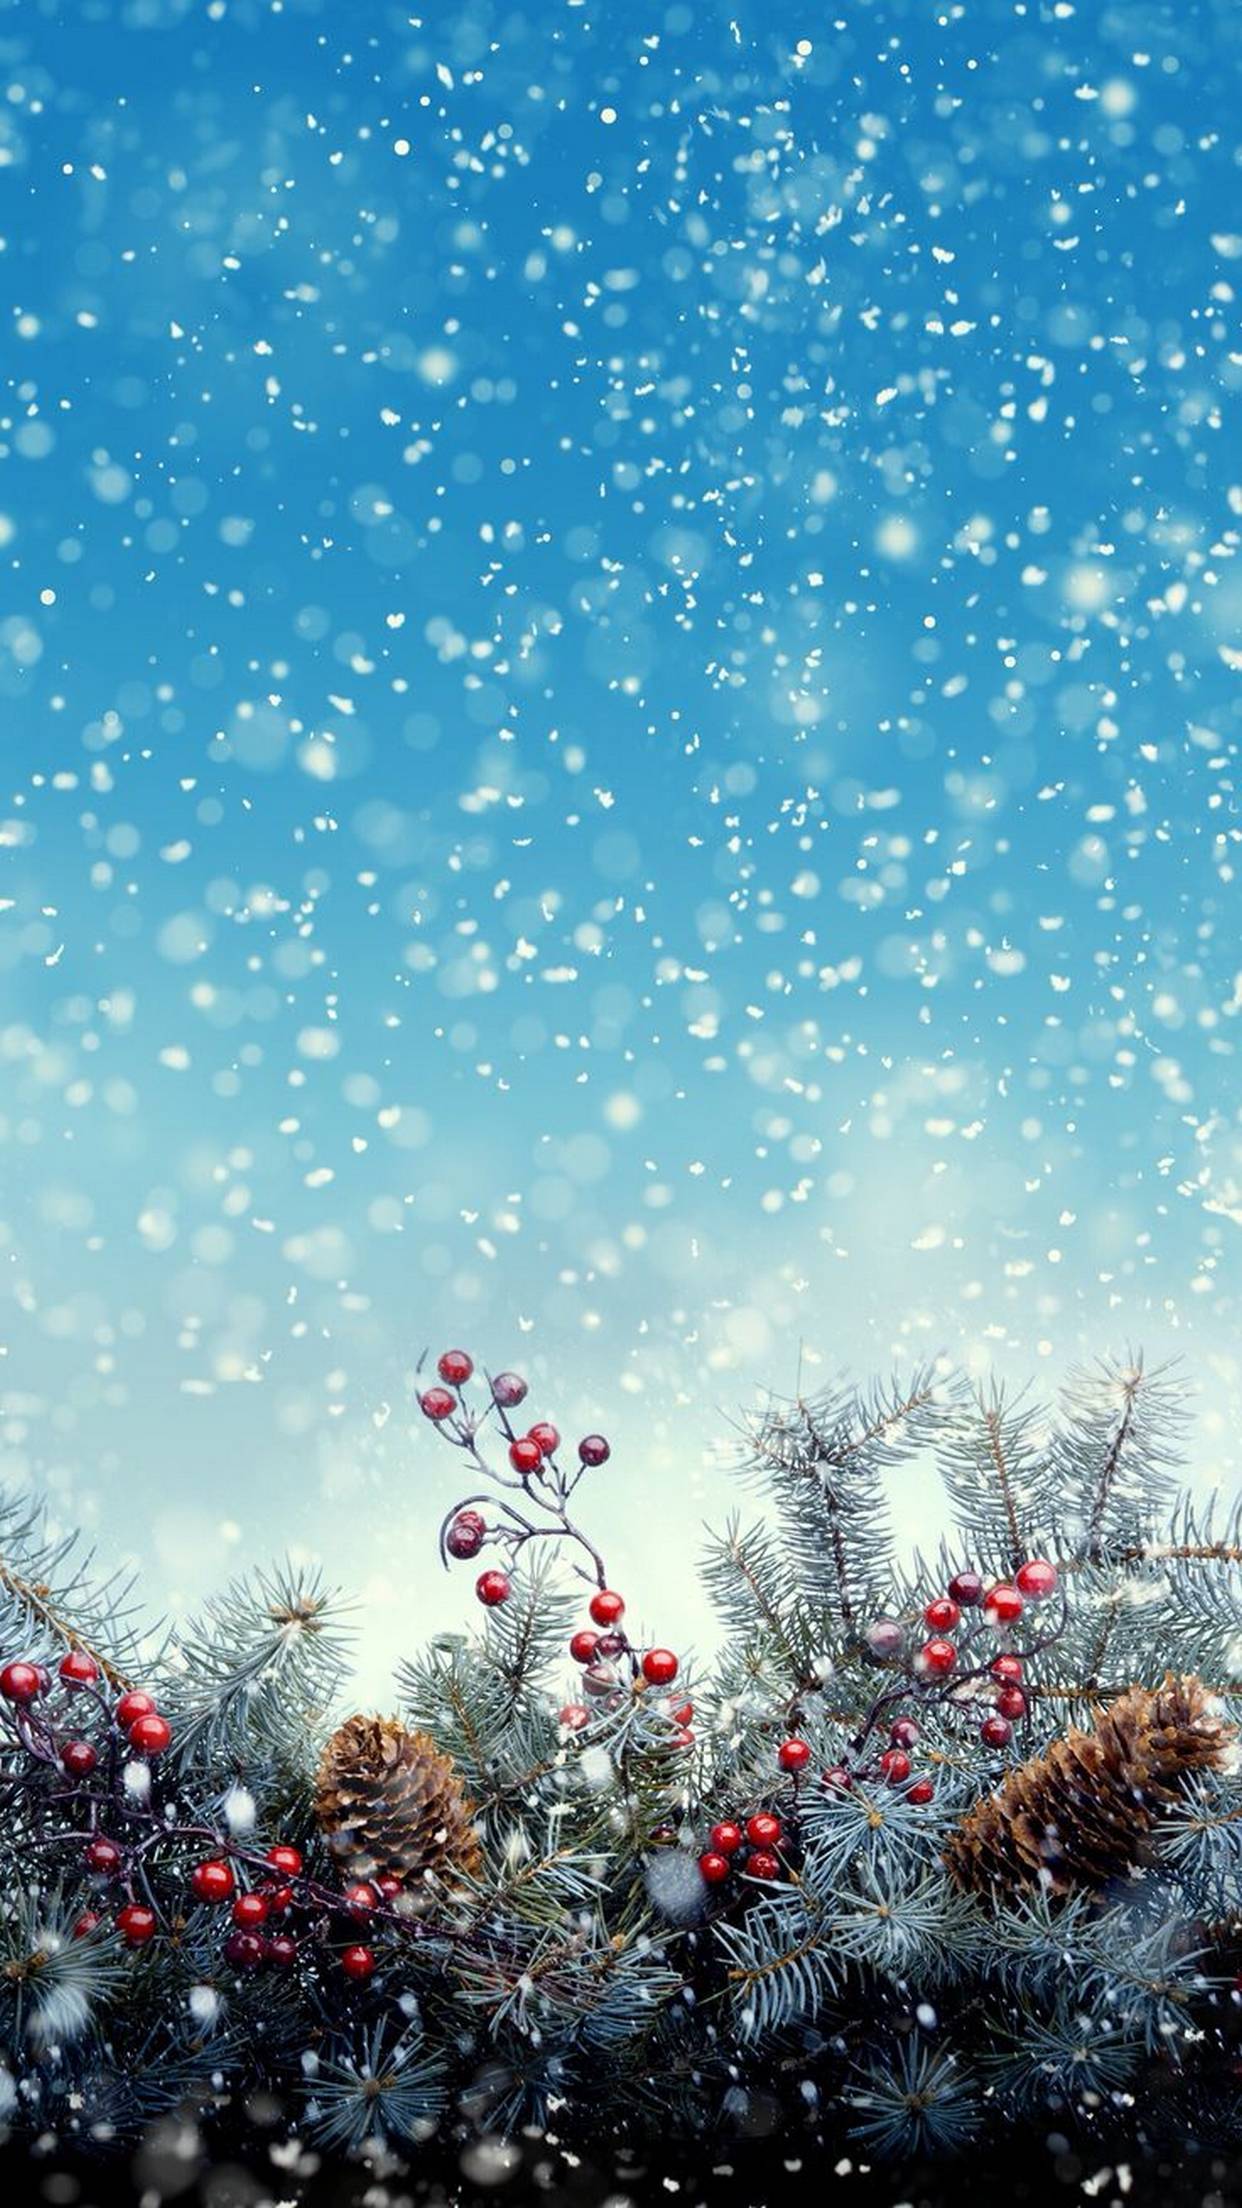 Try to Use 32 Christmas Wallpapers for iPhones